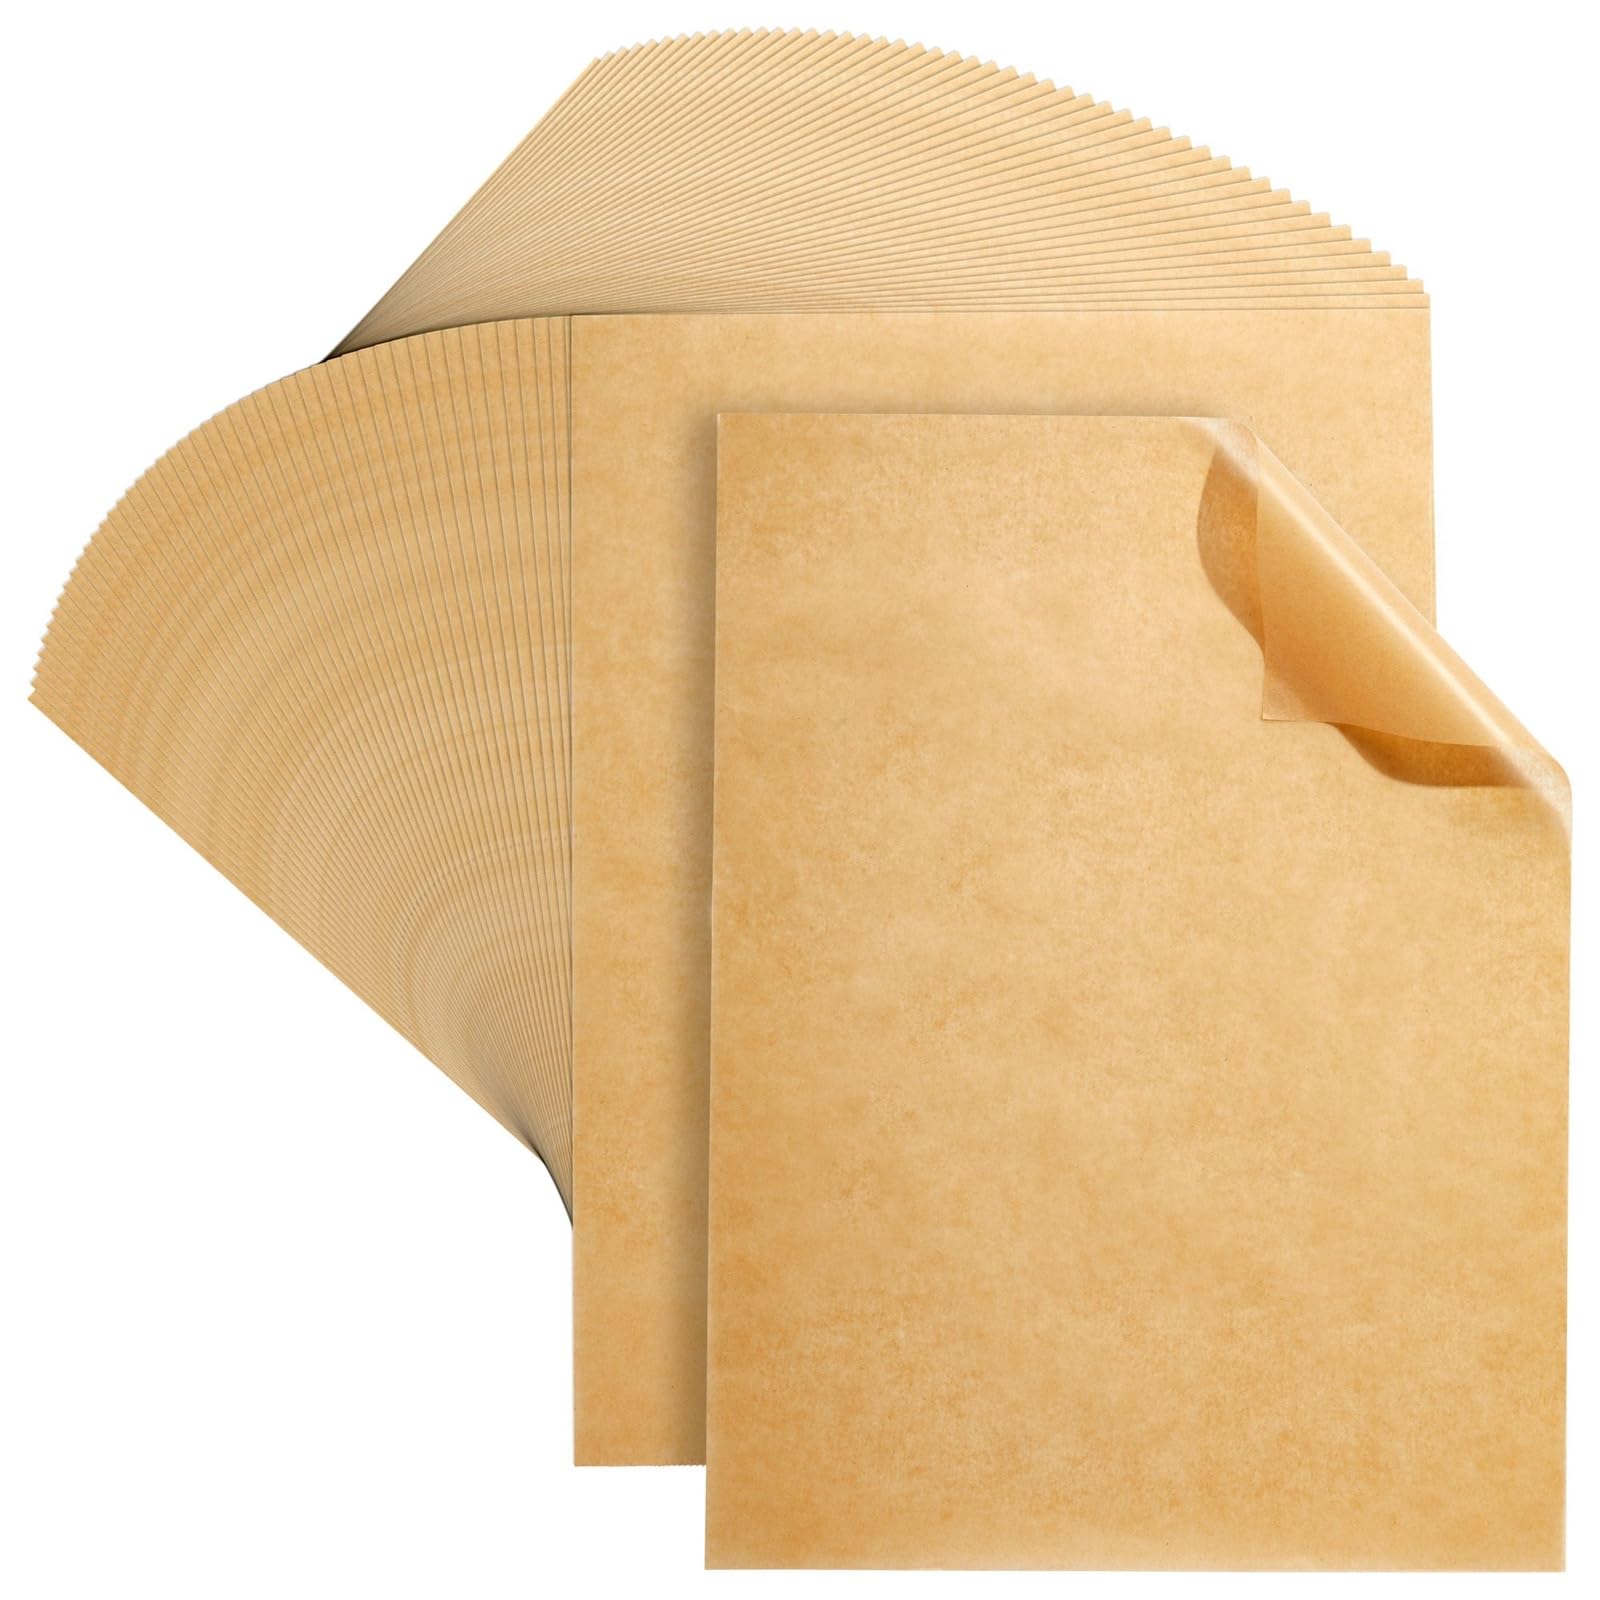 200-Pack Precut Parchment Paper Sheets 12 x 16 inches, Unbleached Brown Nonstick Liners for Half Sheet Pan for Baking, Cooking, Grilling, Air Fryer, Steaming, and Wrapping Food, Heavy Duty